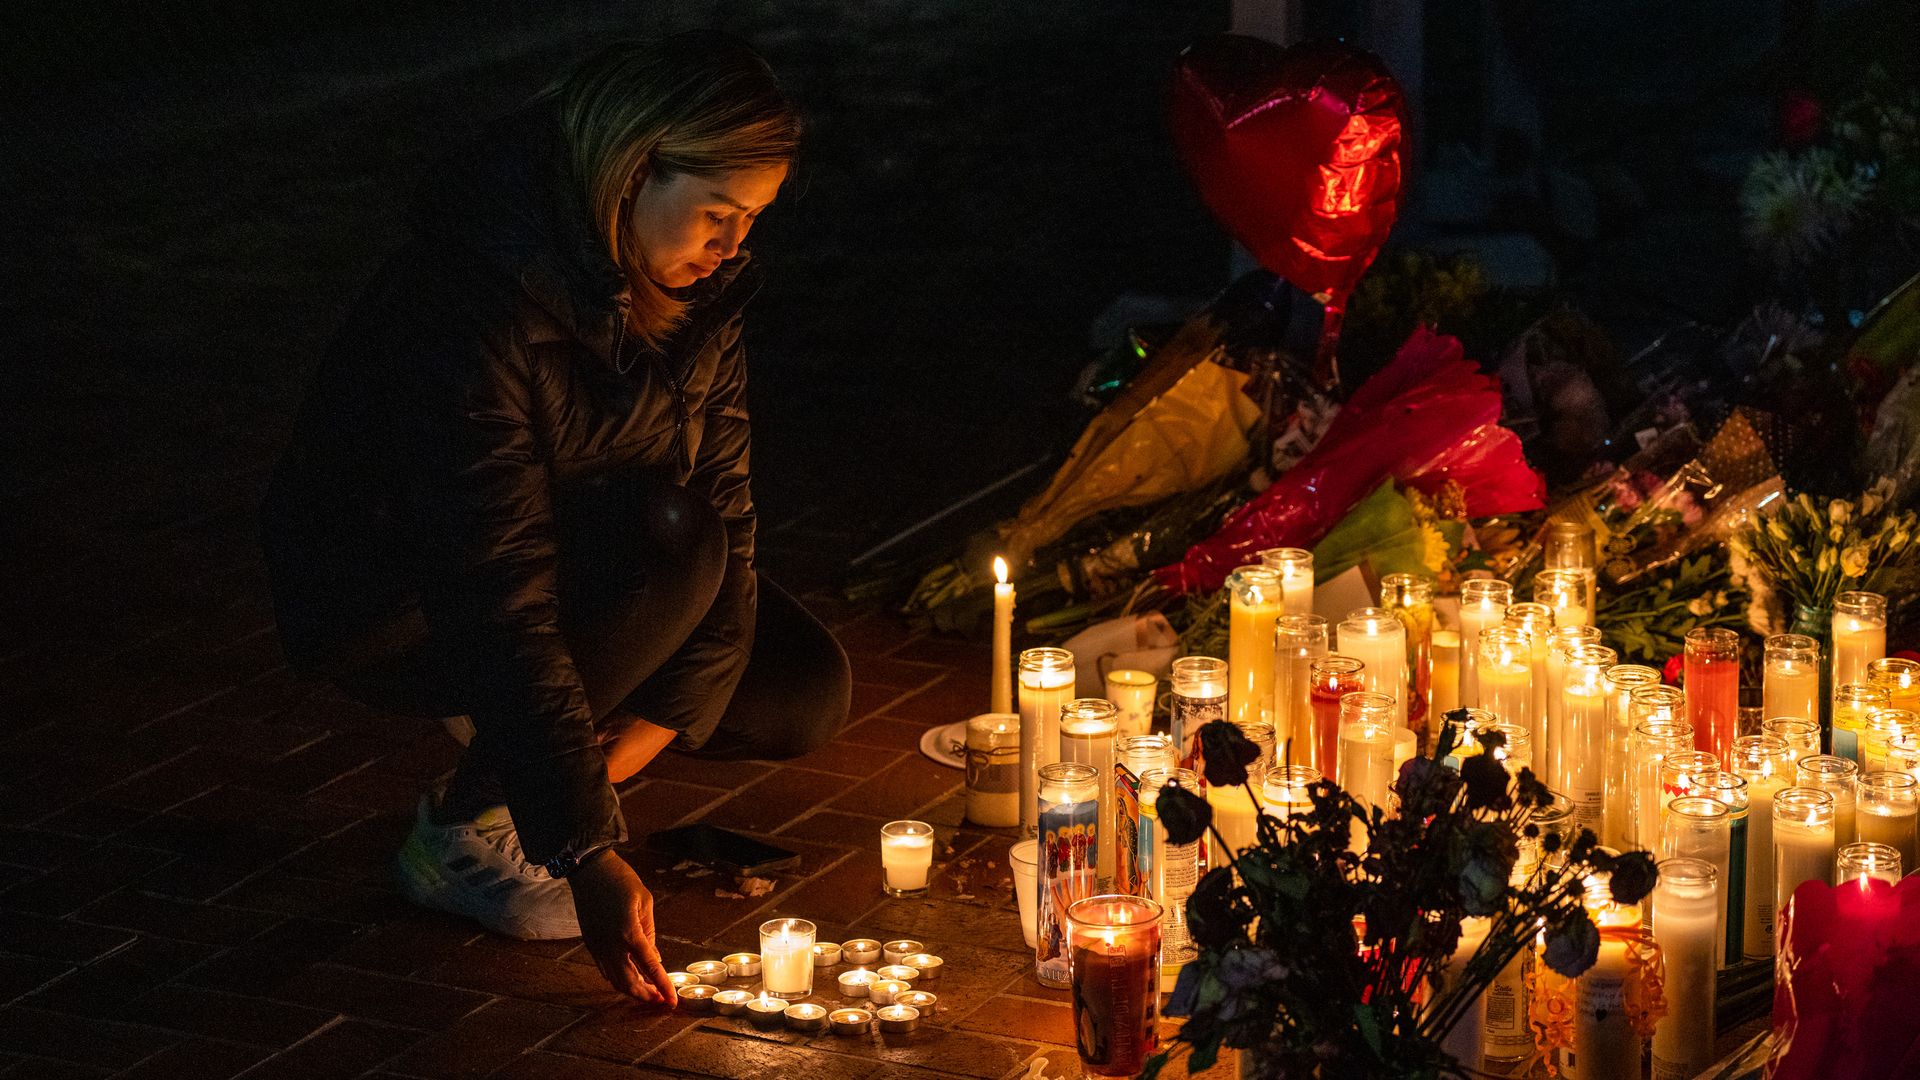  A mourner attends a candlelight vigil for victims of a mass shooting on January 23, 2023 in Monterey Park, California. 